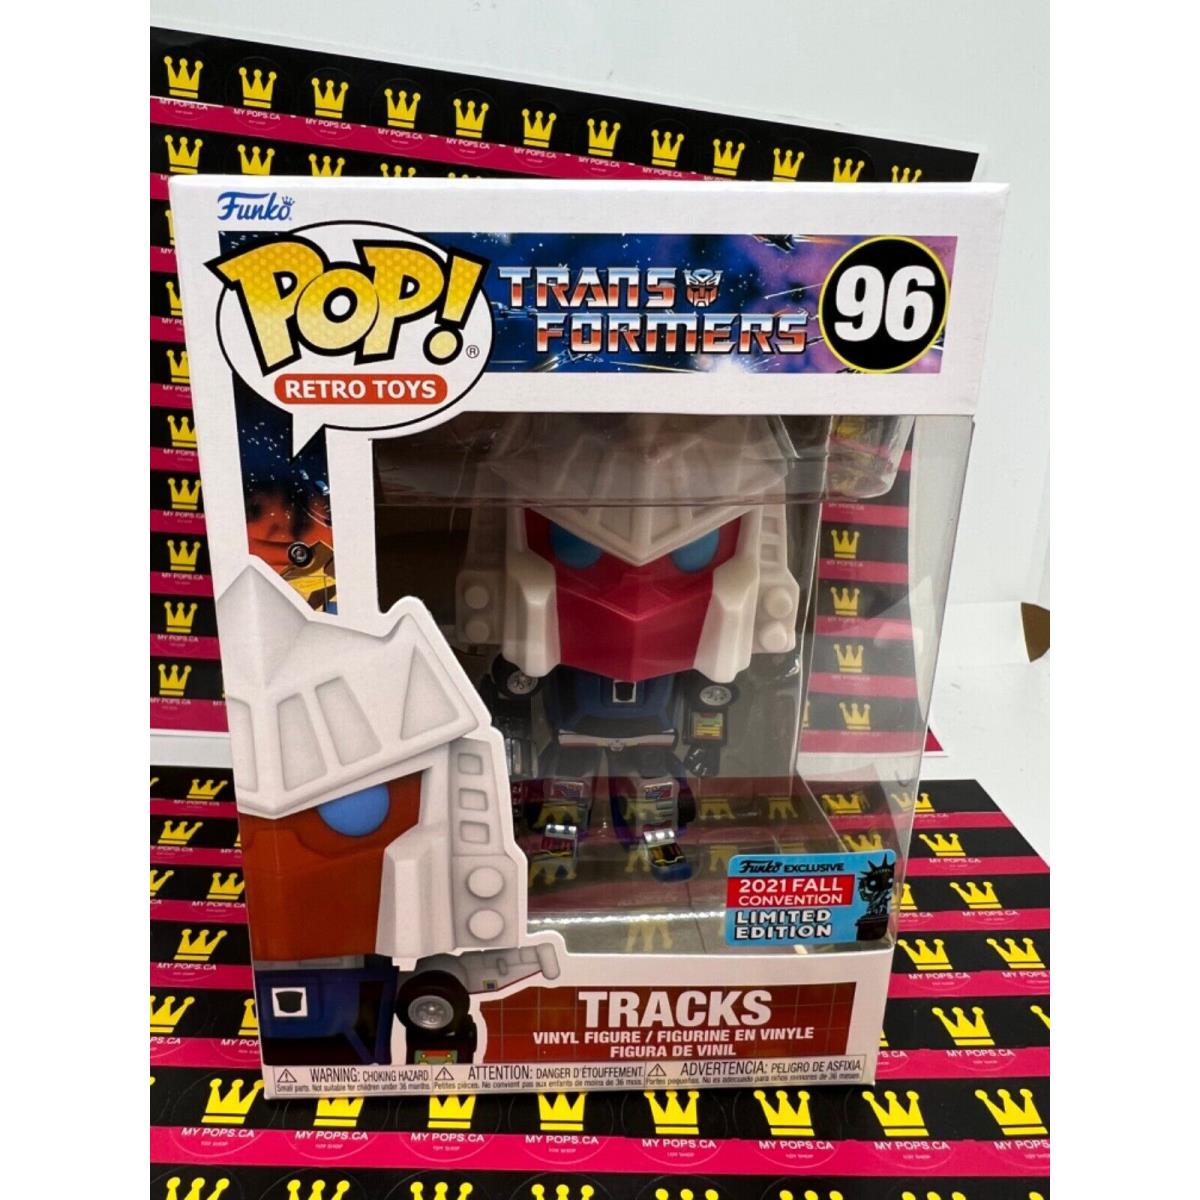 IN Hand 2021 Nycc Fall Convention Funko Pop Transformers Tracks Retro Toys 96